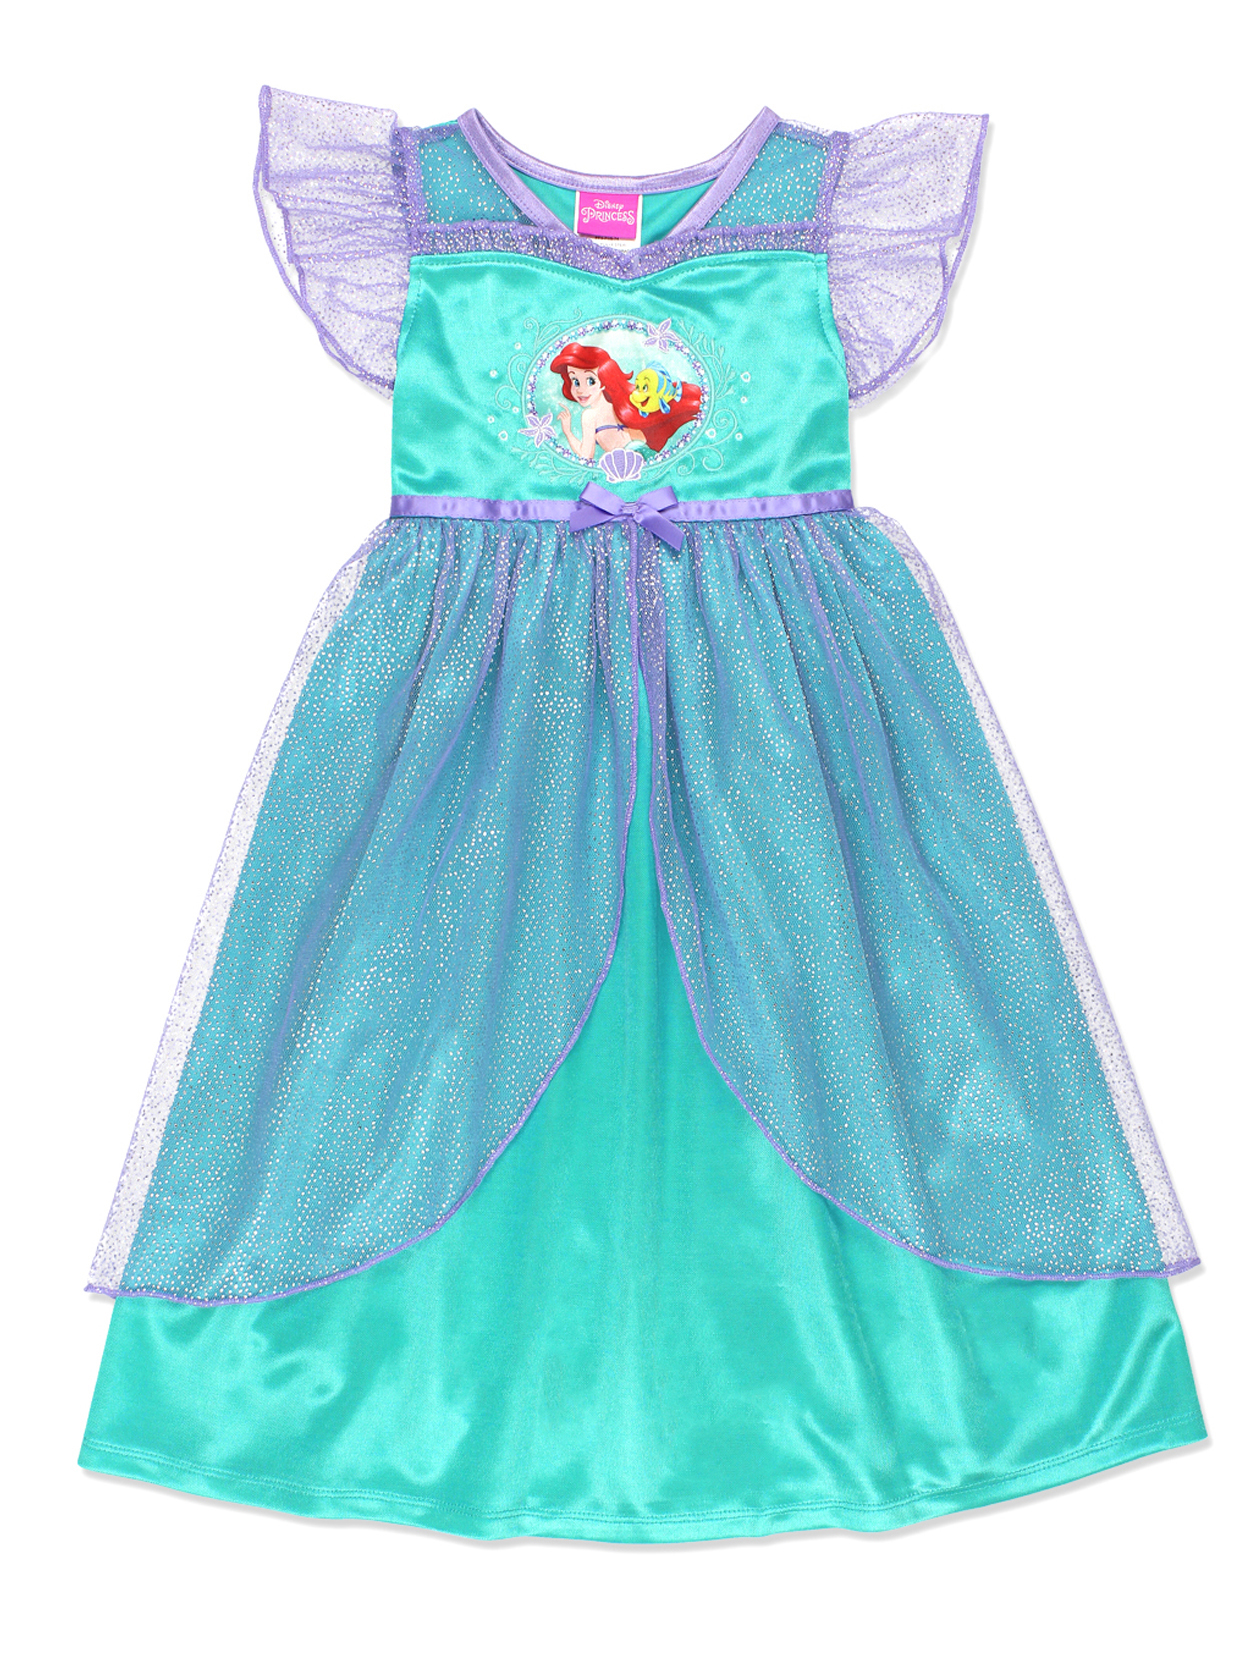 The Little Mermaid Ariel Toddler Girls Fantasy Gown Nightgown Pajamas 21LM165TGS - image 1 of 7